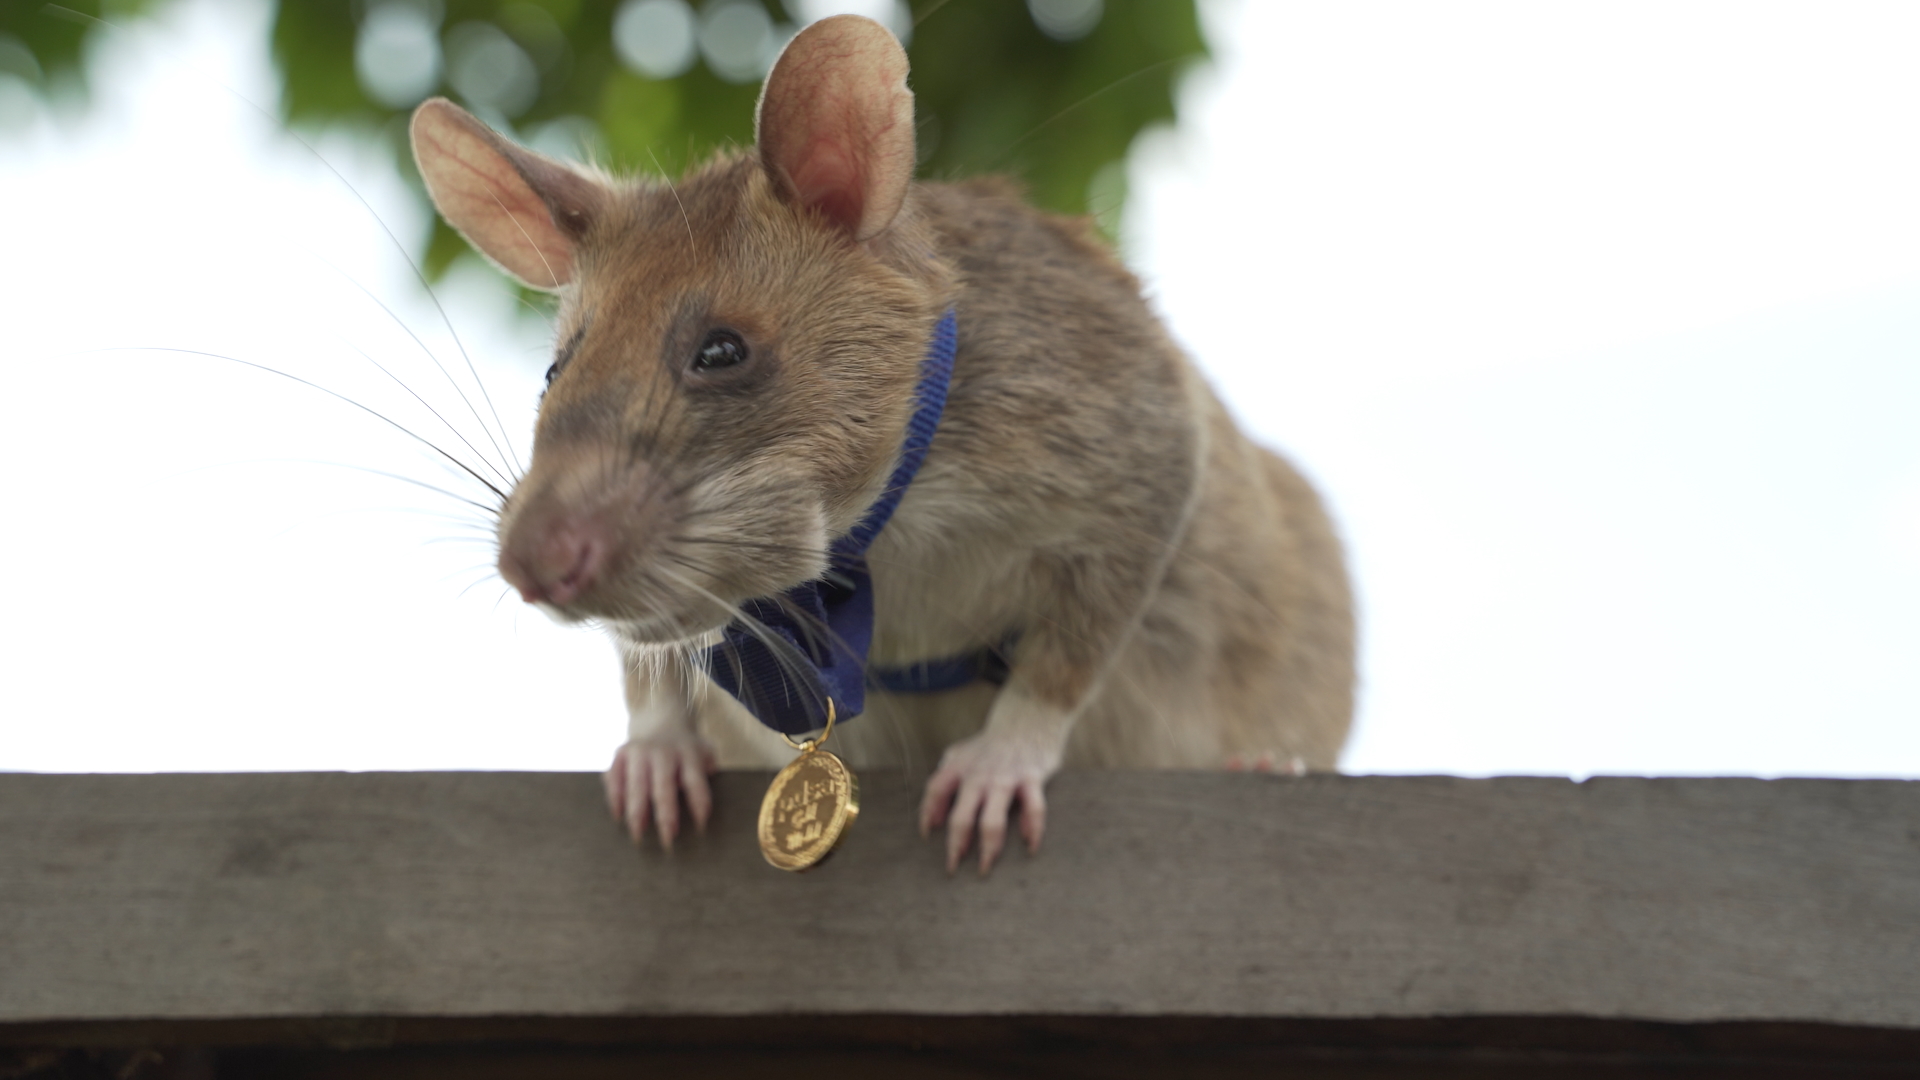 Magawa, an African giant pouched rat, was given a rat-sized People's Dispensary for Sick Animals (PDSA) Gold Medal in September 2020 for his work clearing out mines. Magawa passed away in January 2022. (Courtesy of PDSA)